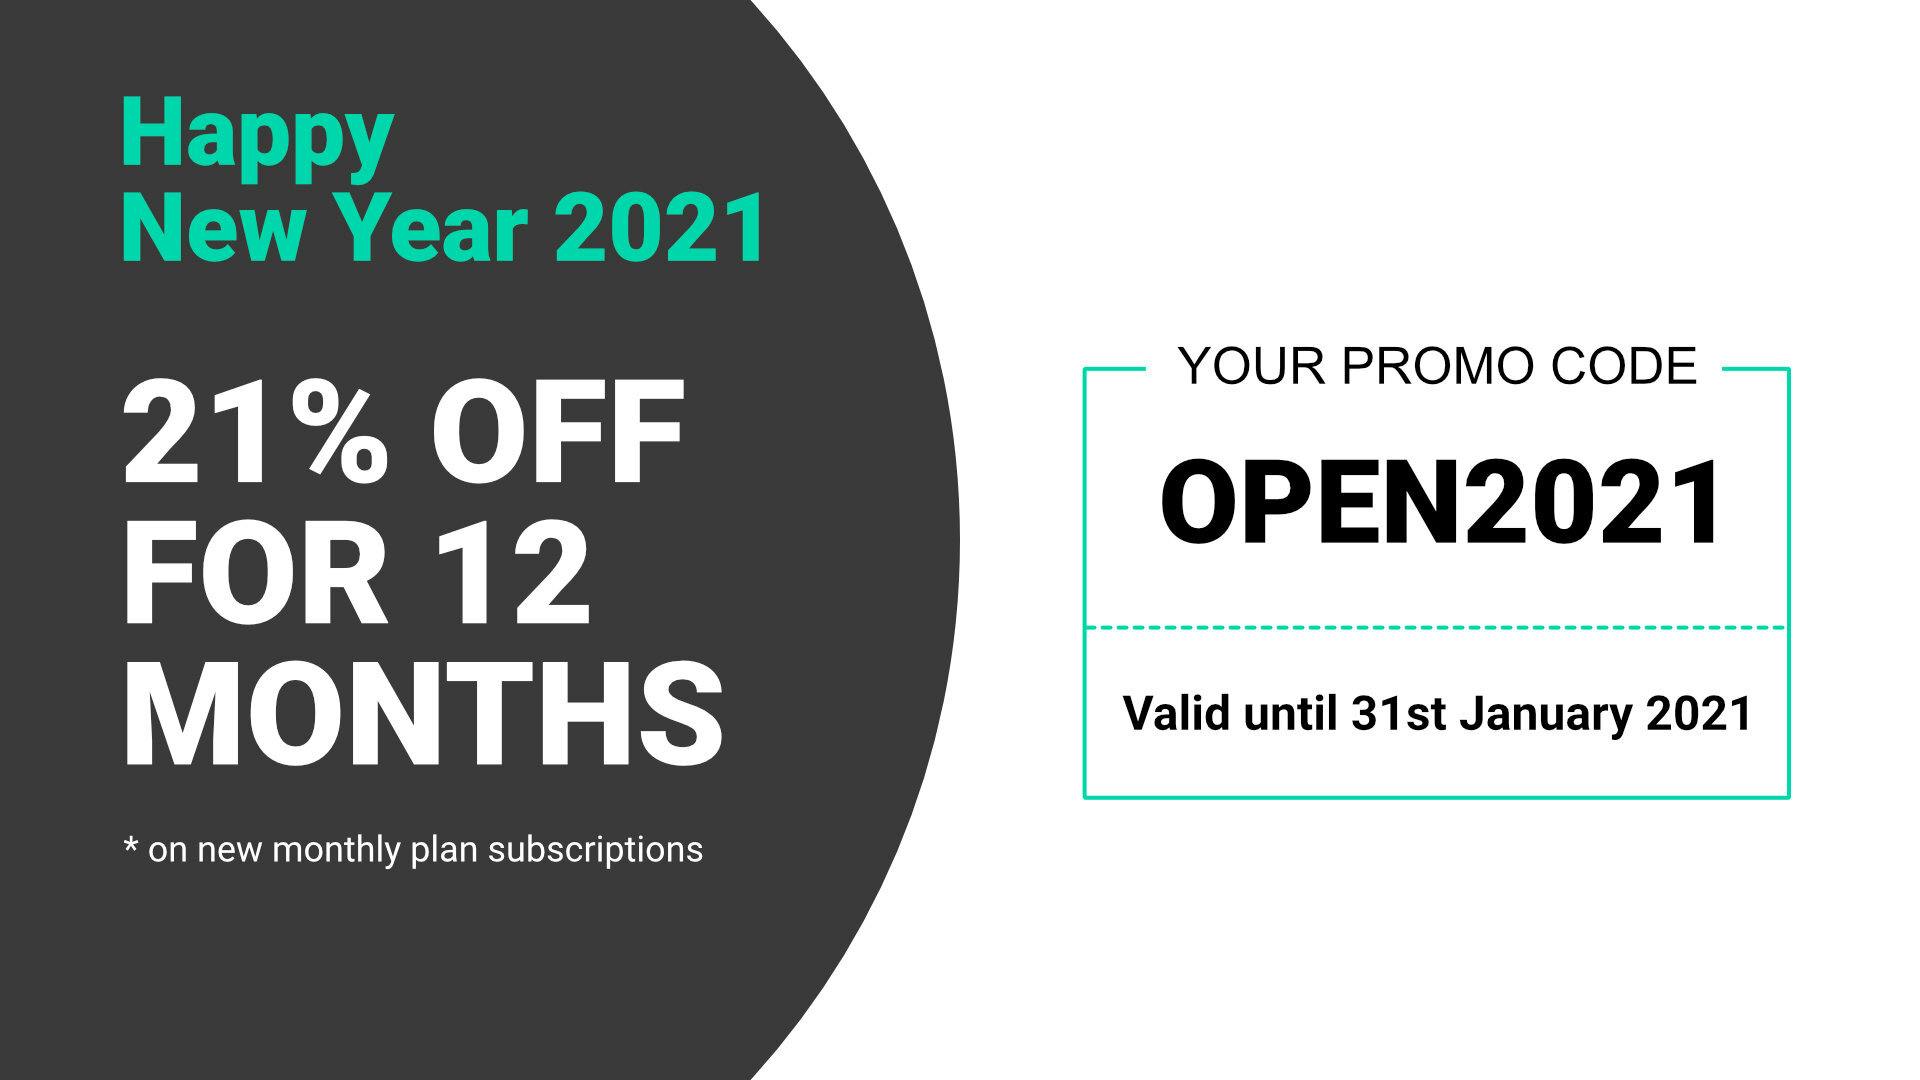 Happy New Year 2021 - 21% off for 12 months